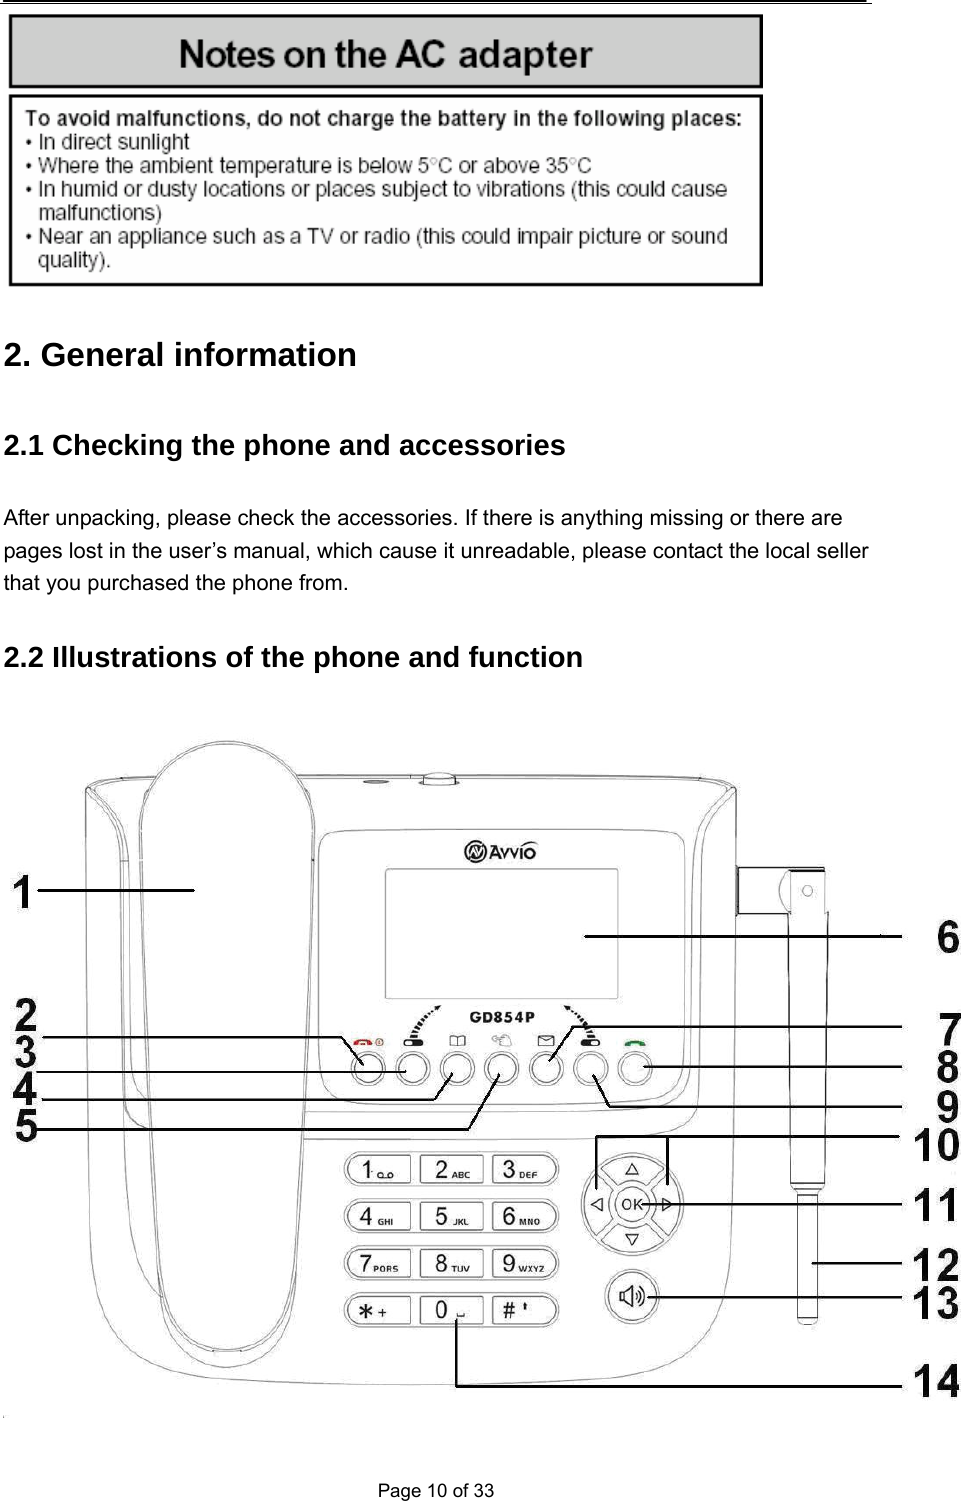  Page 10 of 33  2. General information 2.1 Checking the phone and accessories After unpacking, please check the accessories. If there is anything missing or there are pages lost in the user’s manual, which cause it unreadable, please contact the local seller that you purchased the phone from. 2.2 Illustrations of the phone and function  